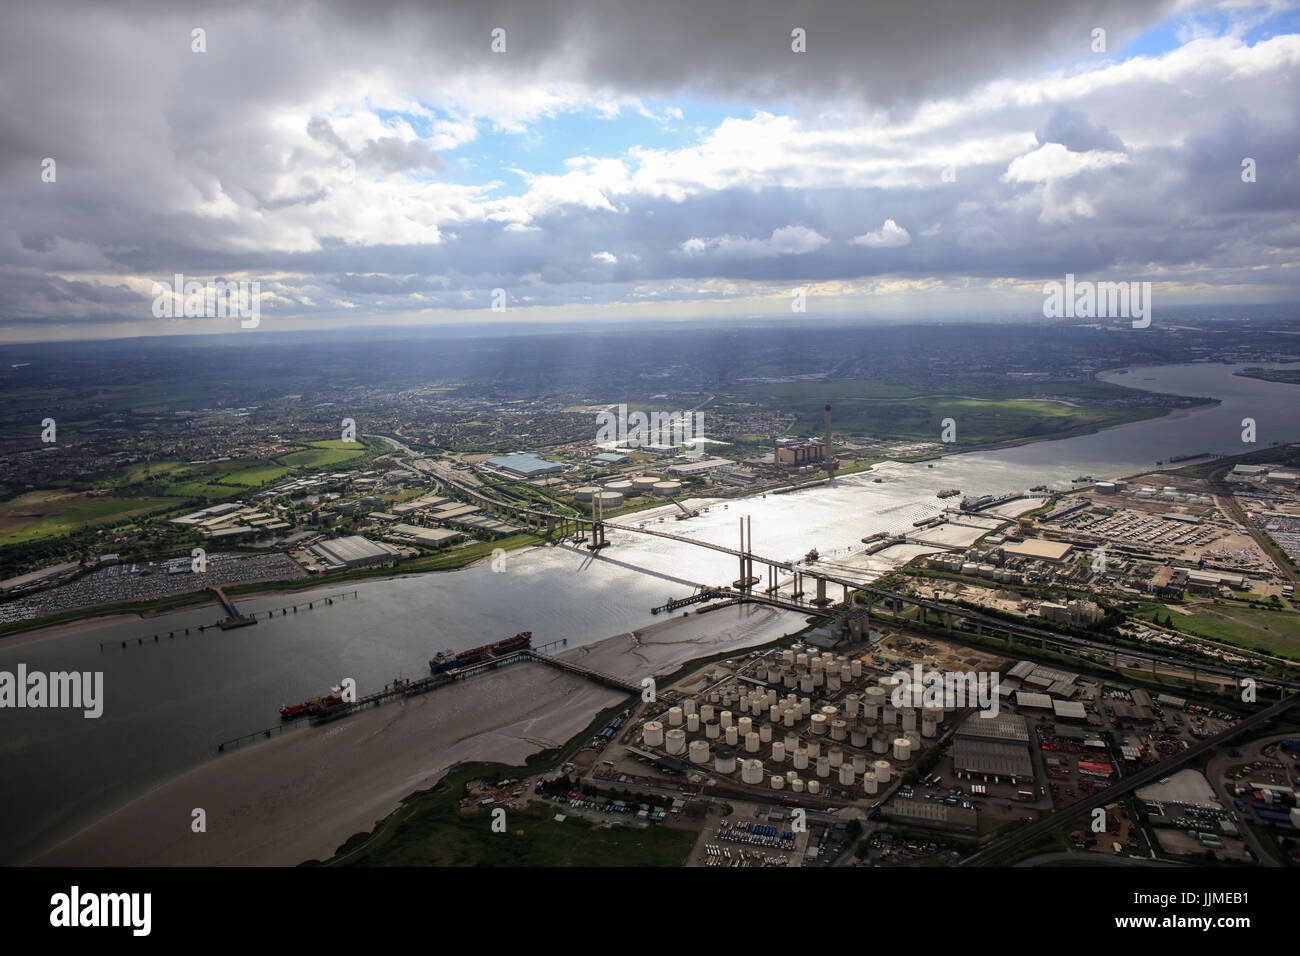 An aerial view showing the QE2 Bridge over the River Thames at Thurrock illuminated by sunlight Stock Photo